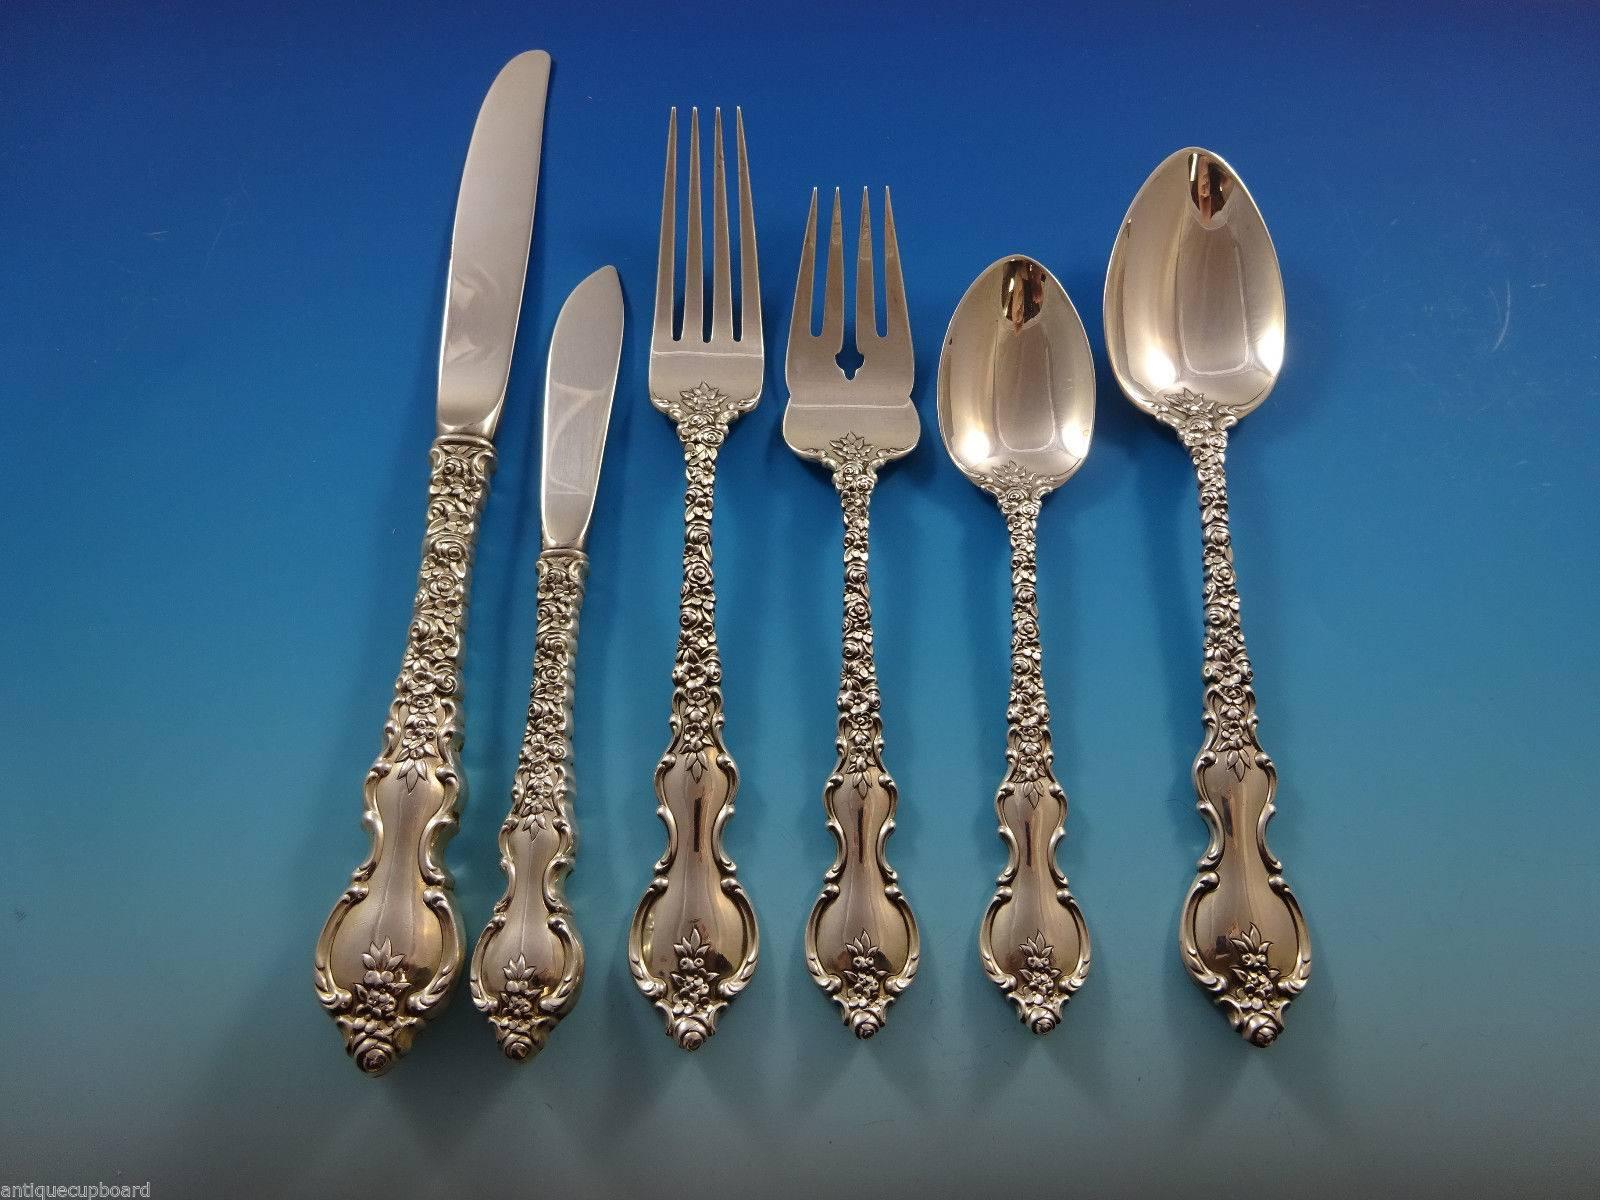 Gorgeous Du Barry by International sterling silver flatware set of 72 pieces. This desirable pattern is heavy and hard to find. This set includes:

12 knives, 9